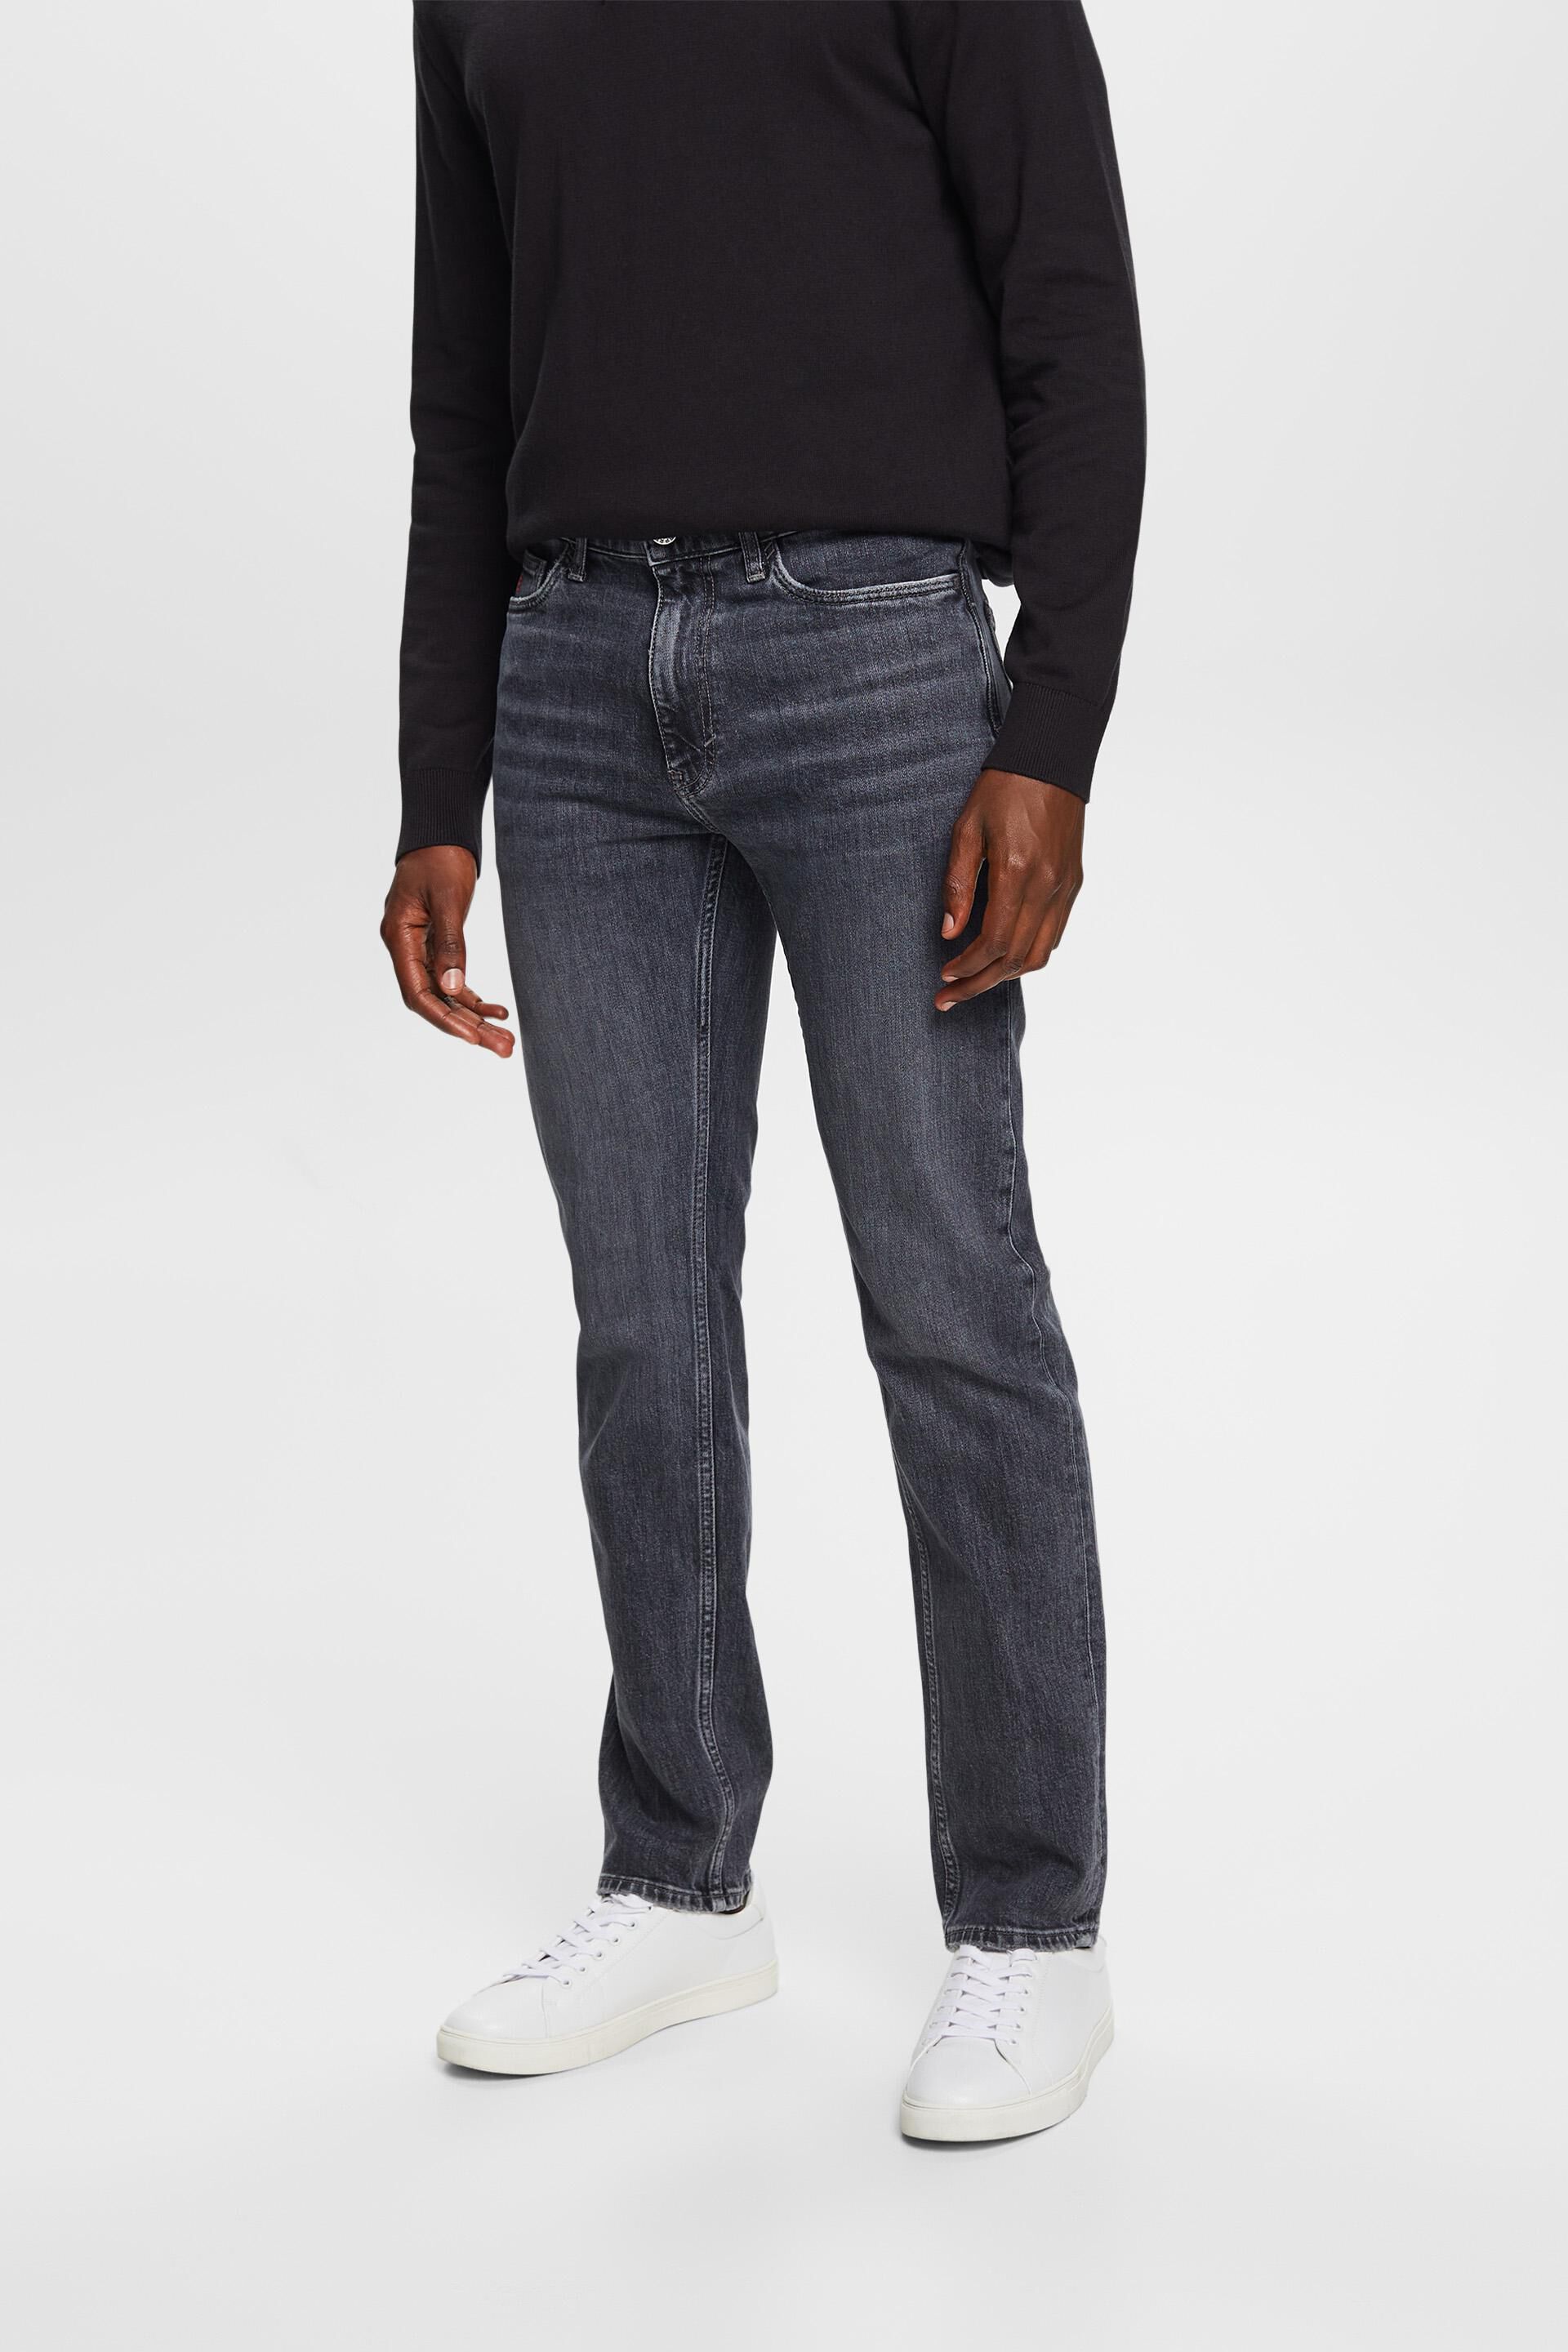 Esprit Straight-Leg Relaxed Jeans